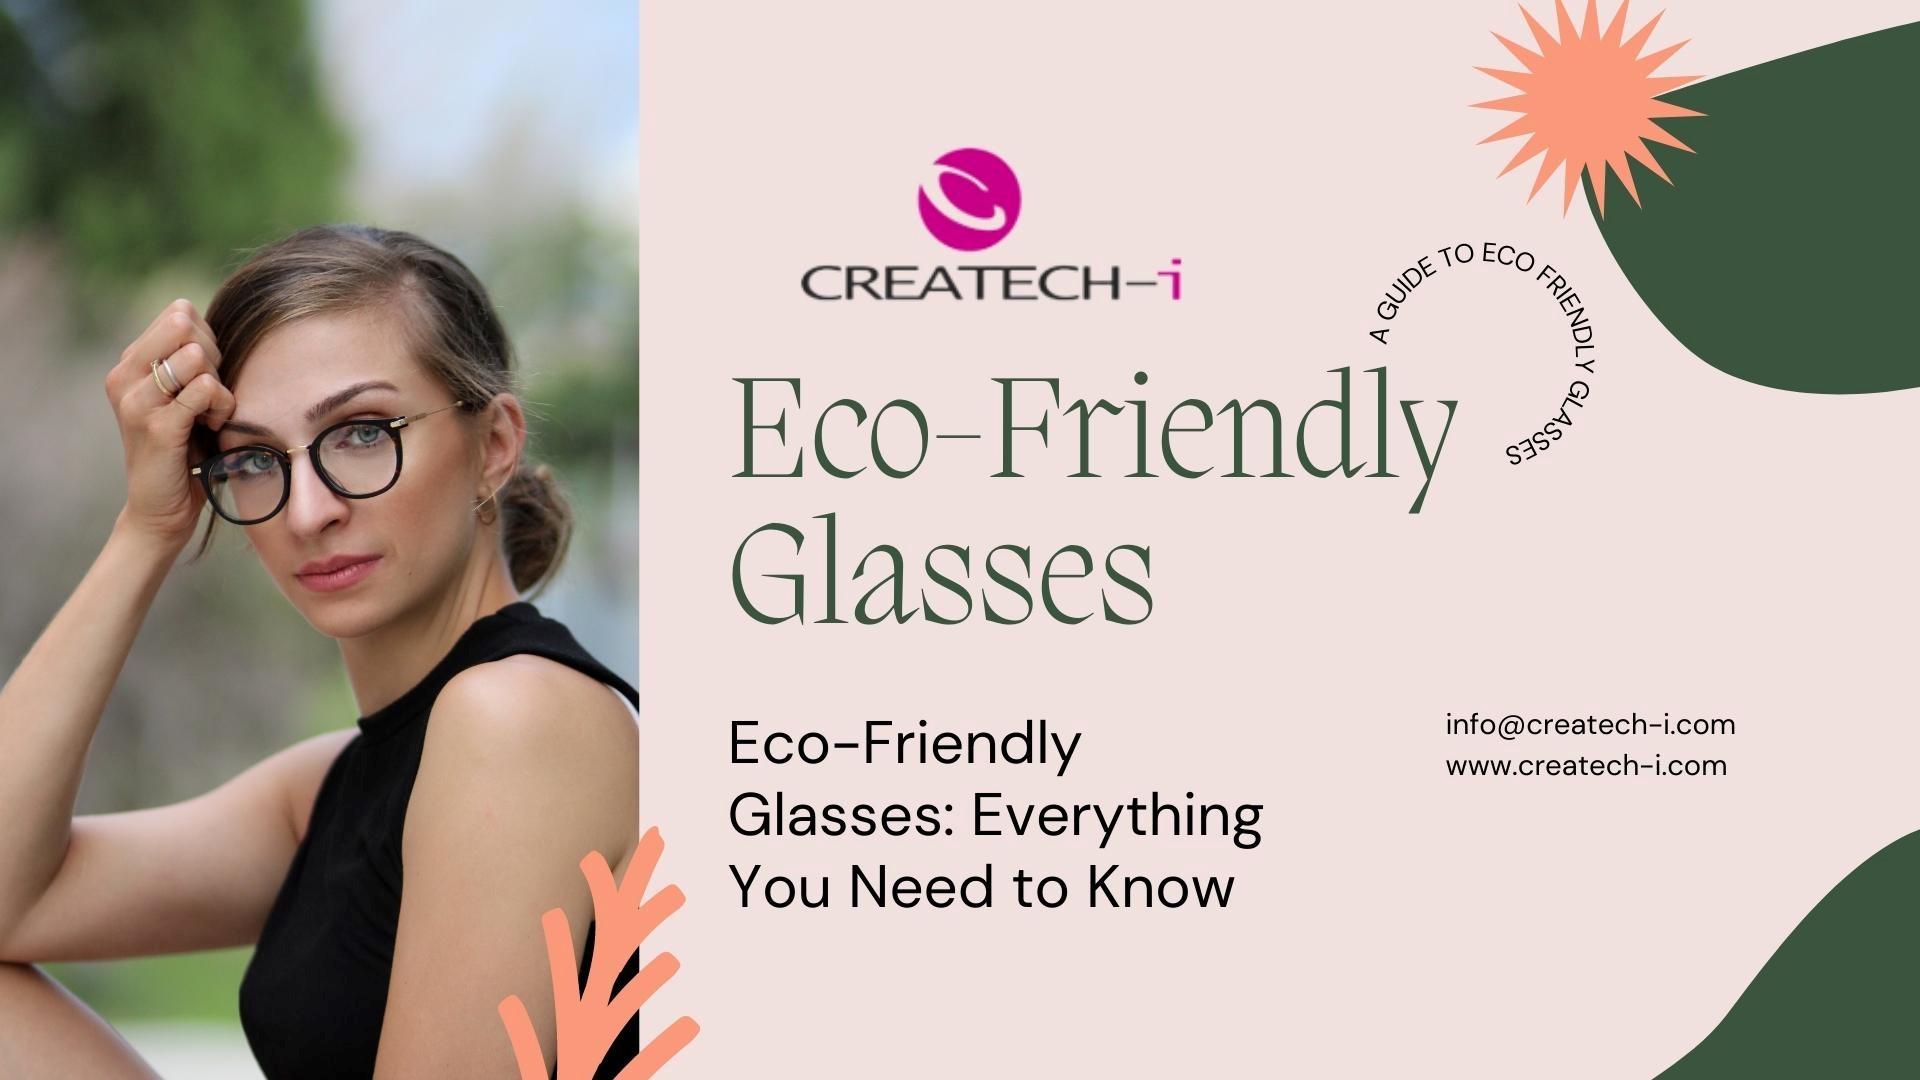 Eco-Friendly Glasses: Everything You Need to Know